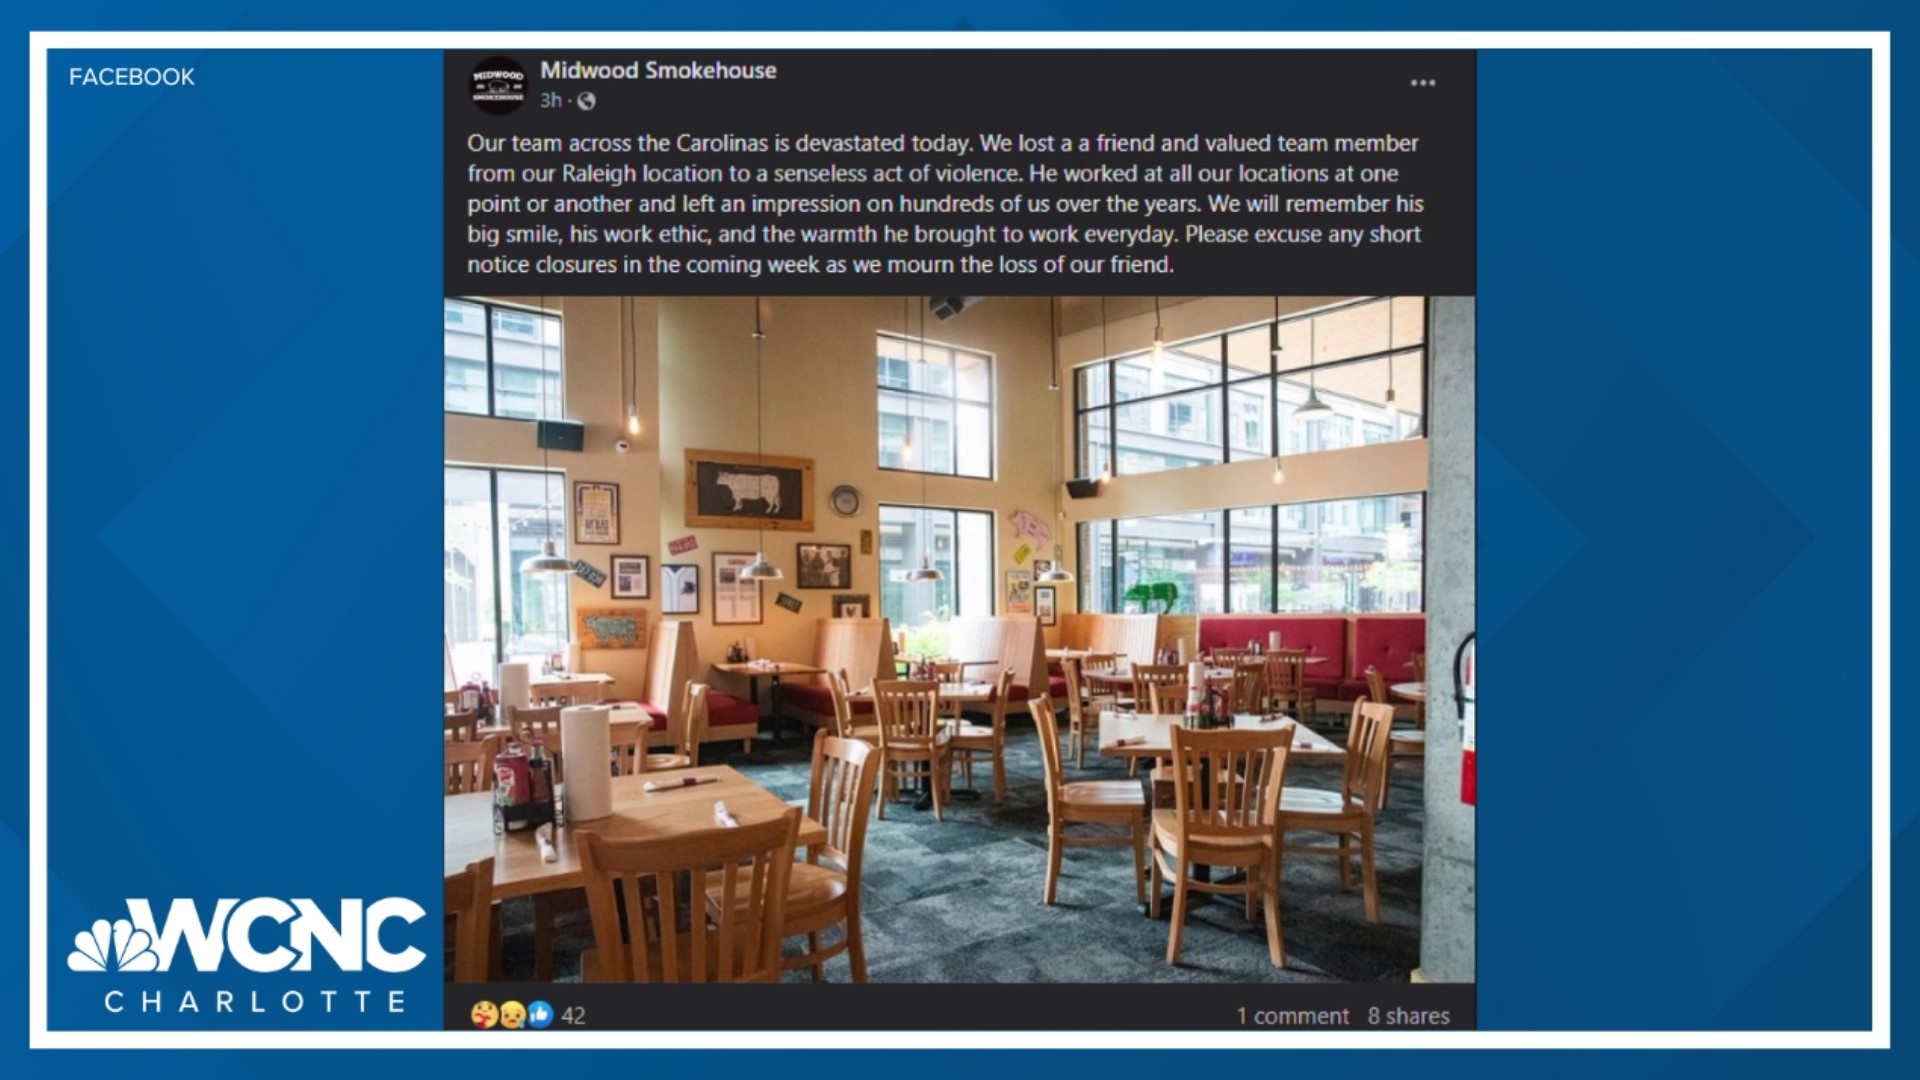 Millette was a general partner of Midwood Smokehouse, which opened in the spring at 409 West Johnson St and is part of the Charlotte-based FSFJ restaurant group.